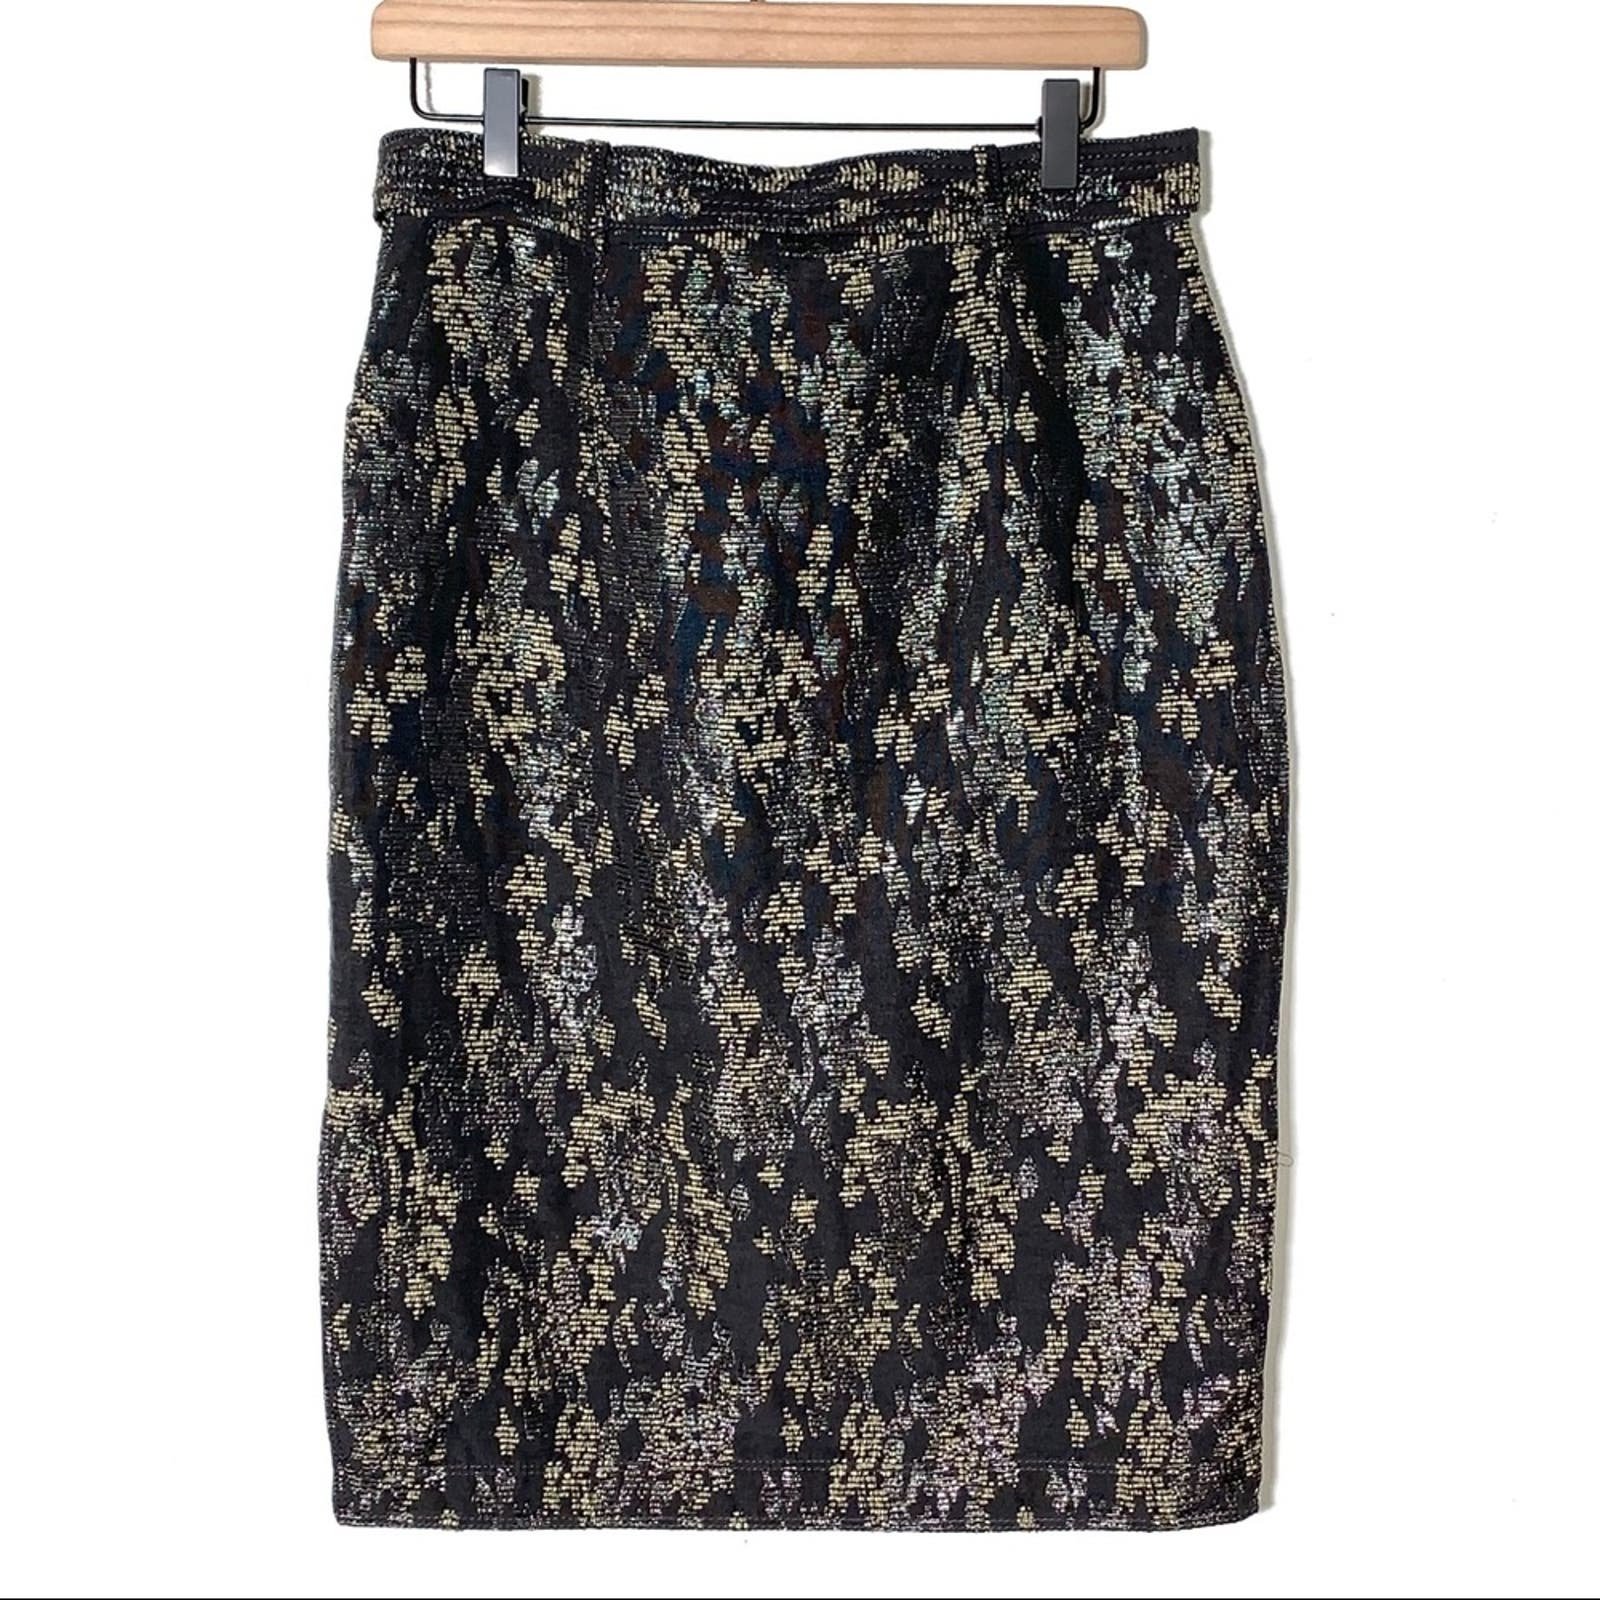 Popular banana republic black beige & silver midi skirt with tie at waist size 4 OVQ5AA01d Great